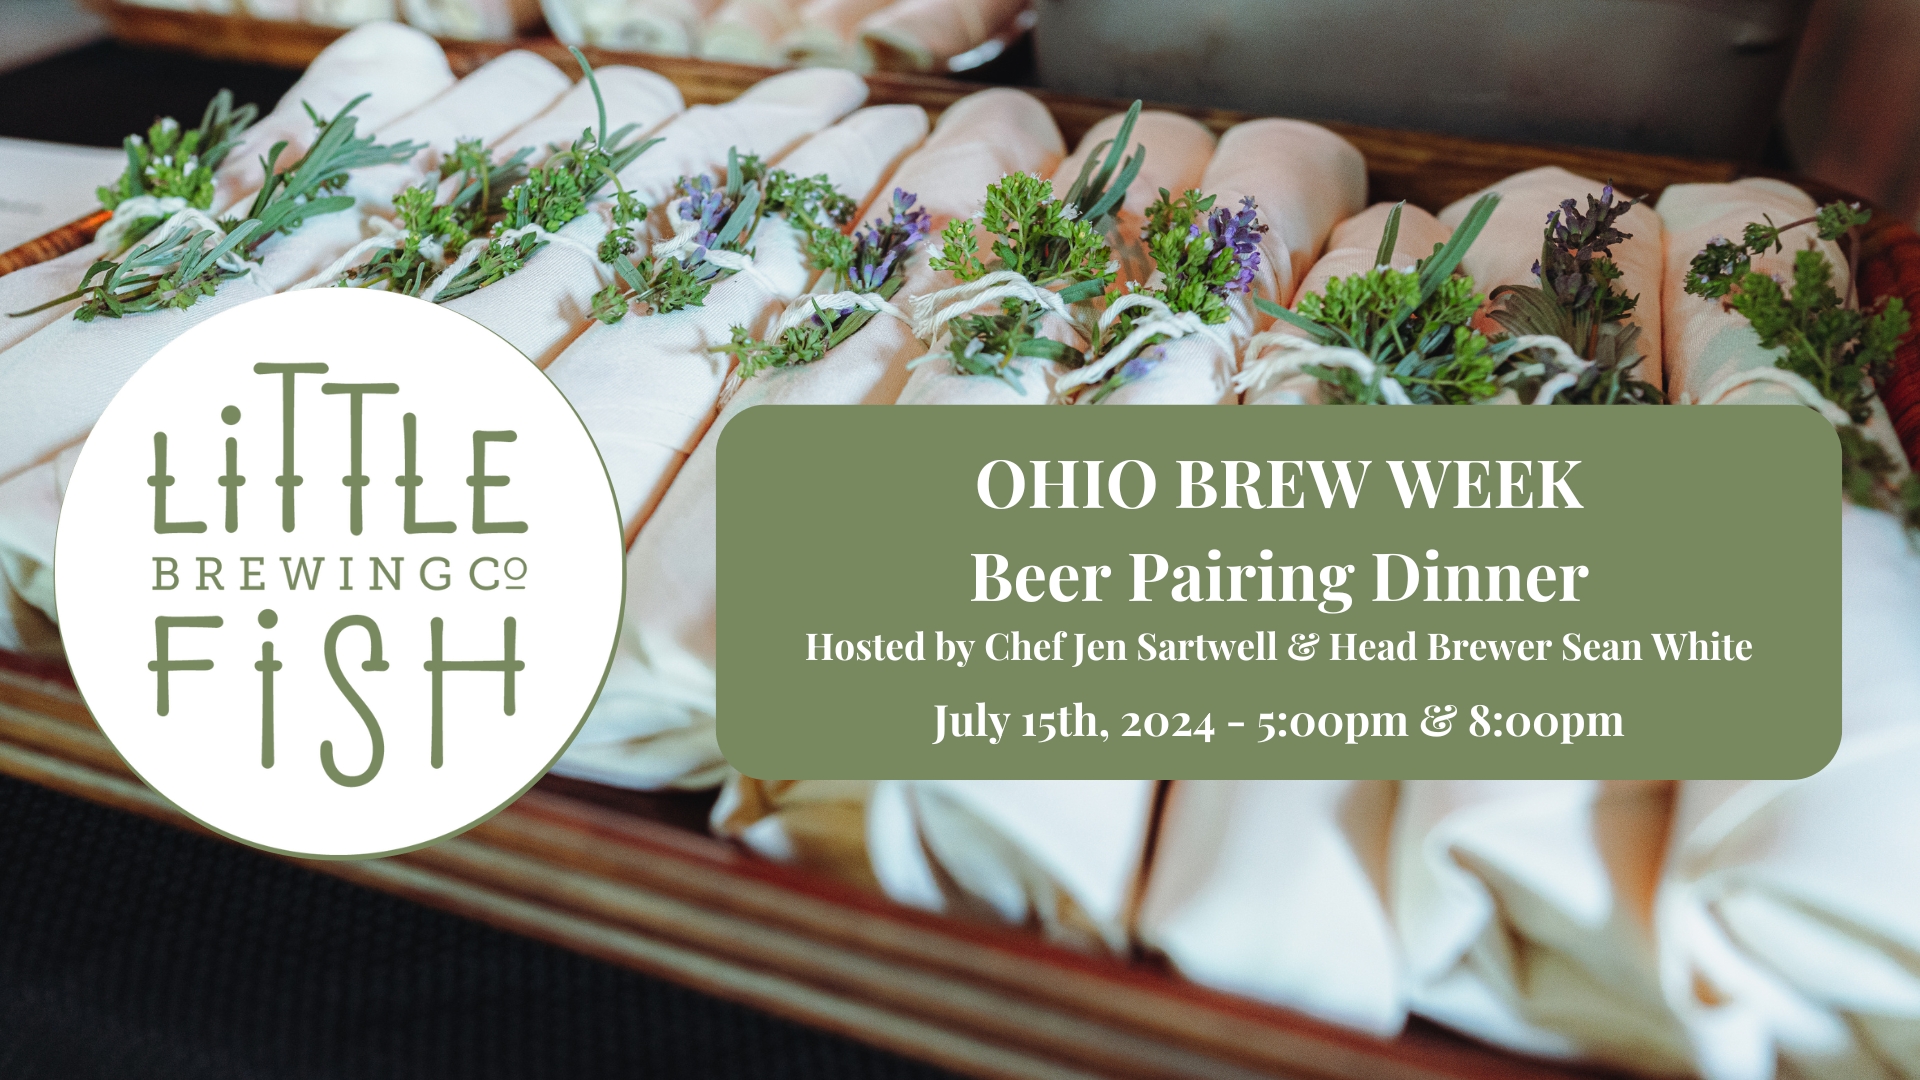 An image of a flyer for the Ohio Brew Week Beer Pairing Event. The background image is of cutlery sets wrapped in white napkins.